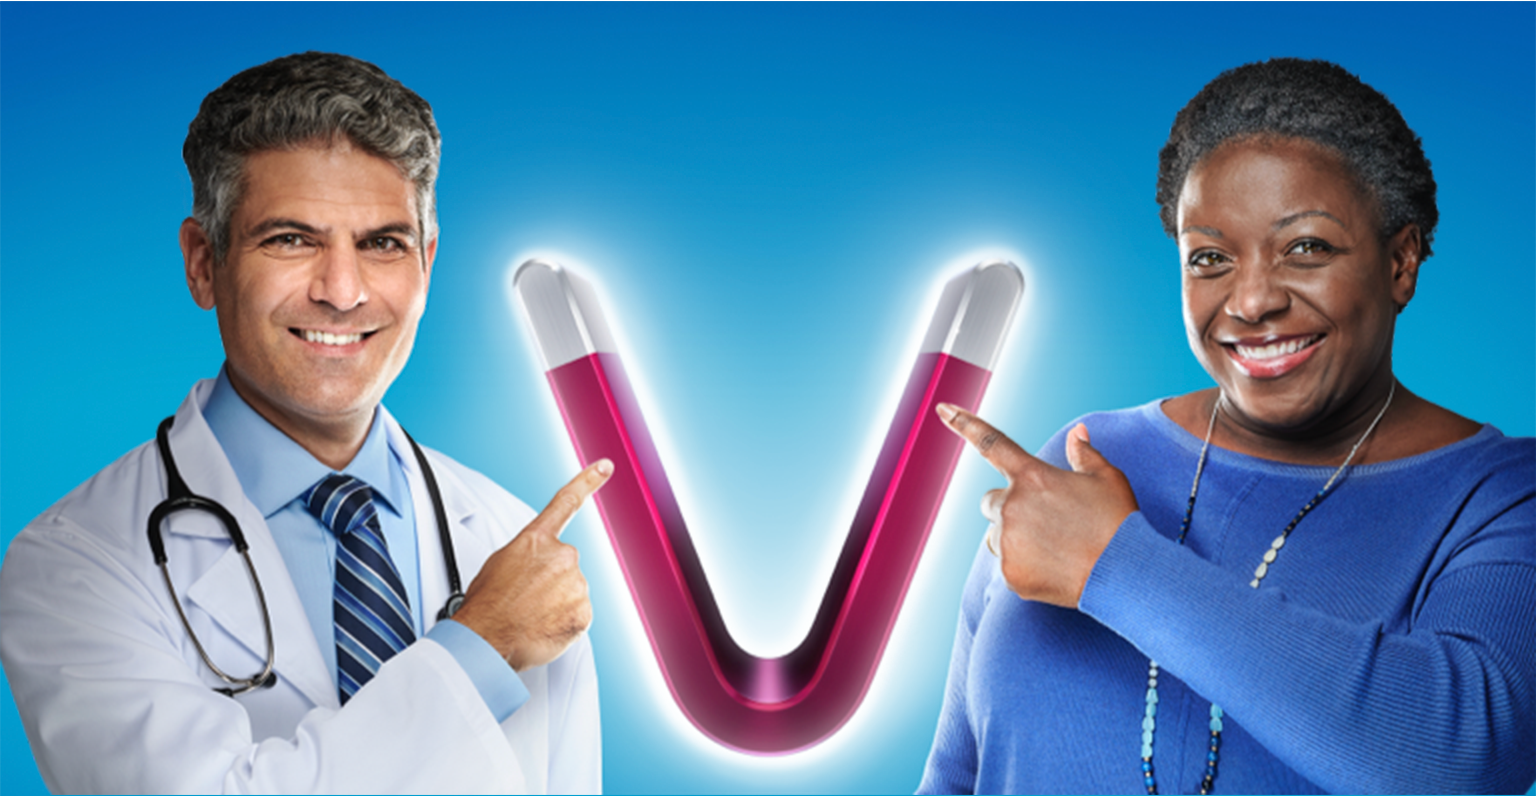 Image of healthcare provider and patient pointing to a V-shaped magnet